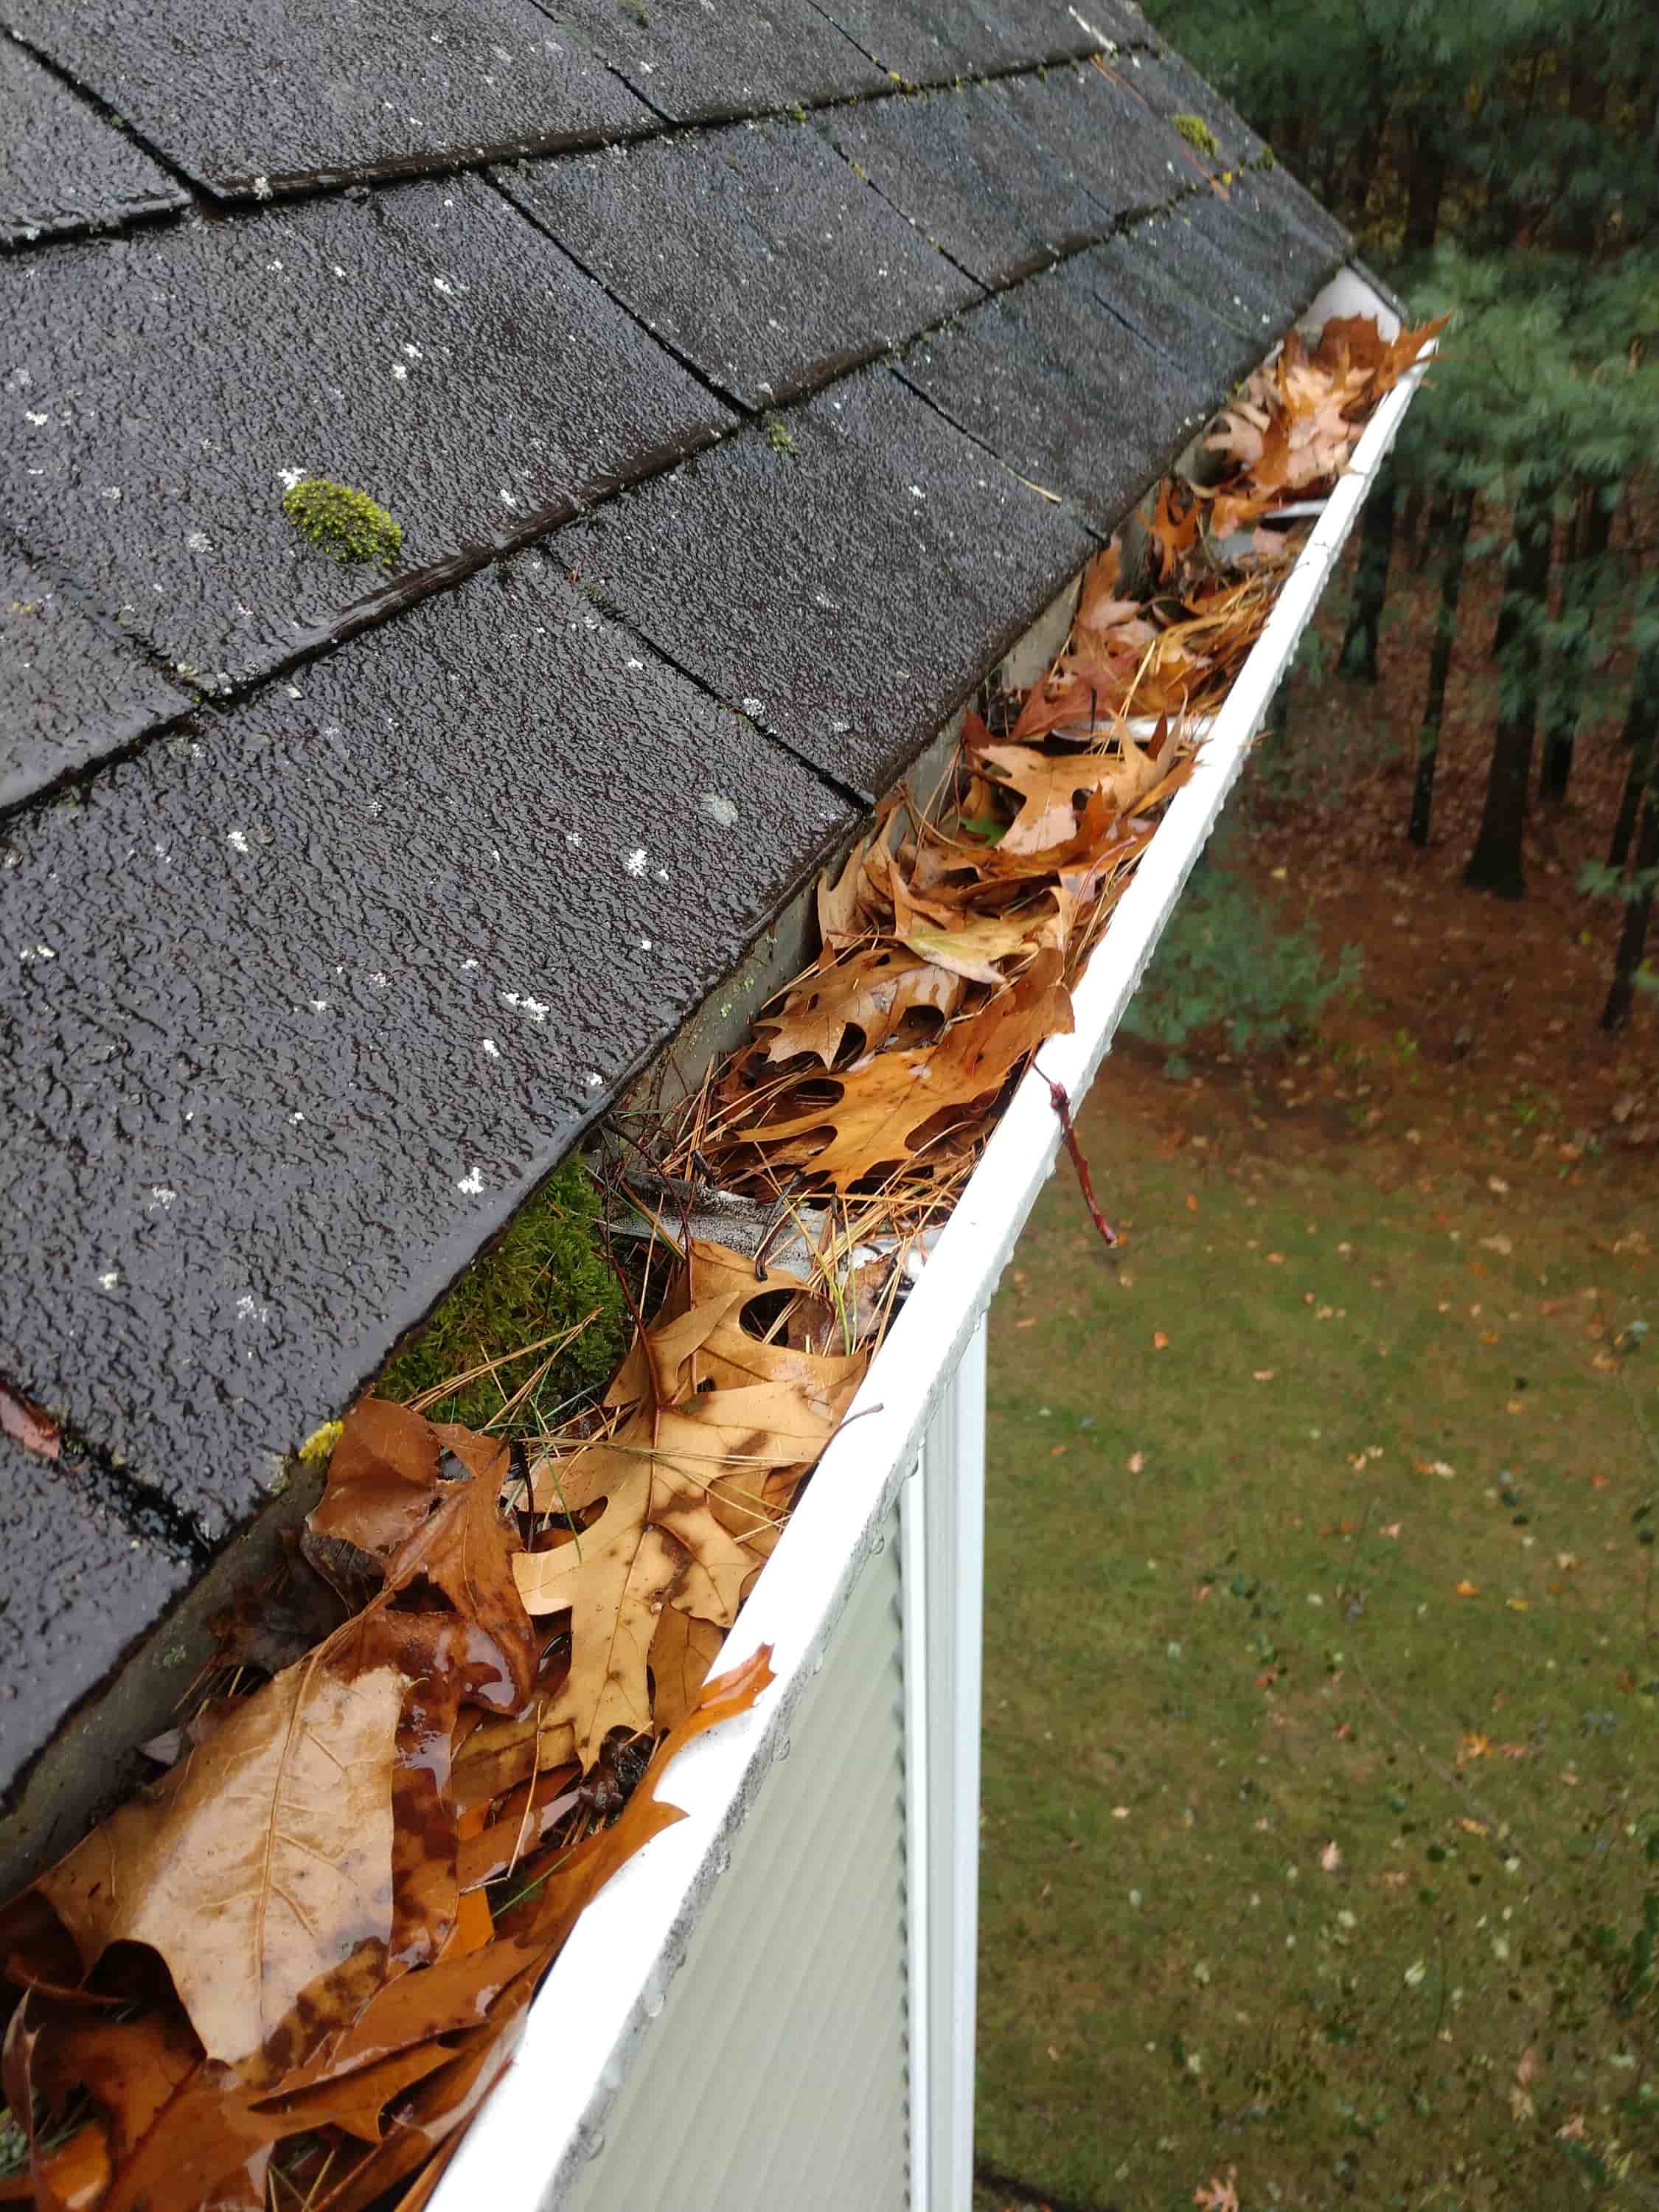 gutter cleaning near me prices